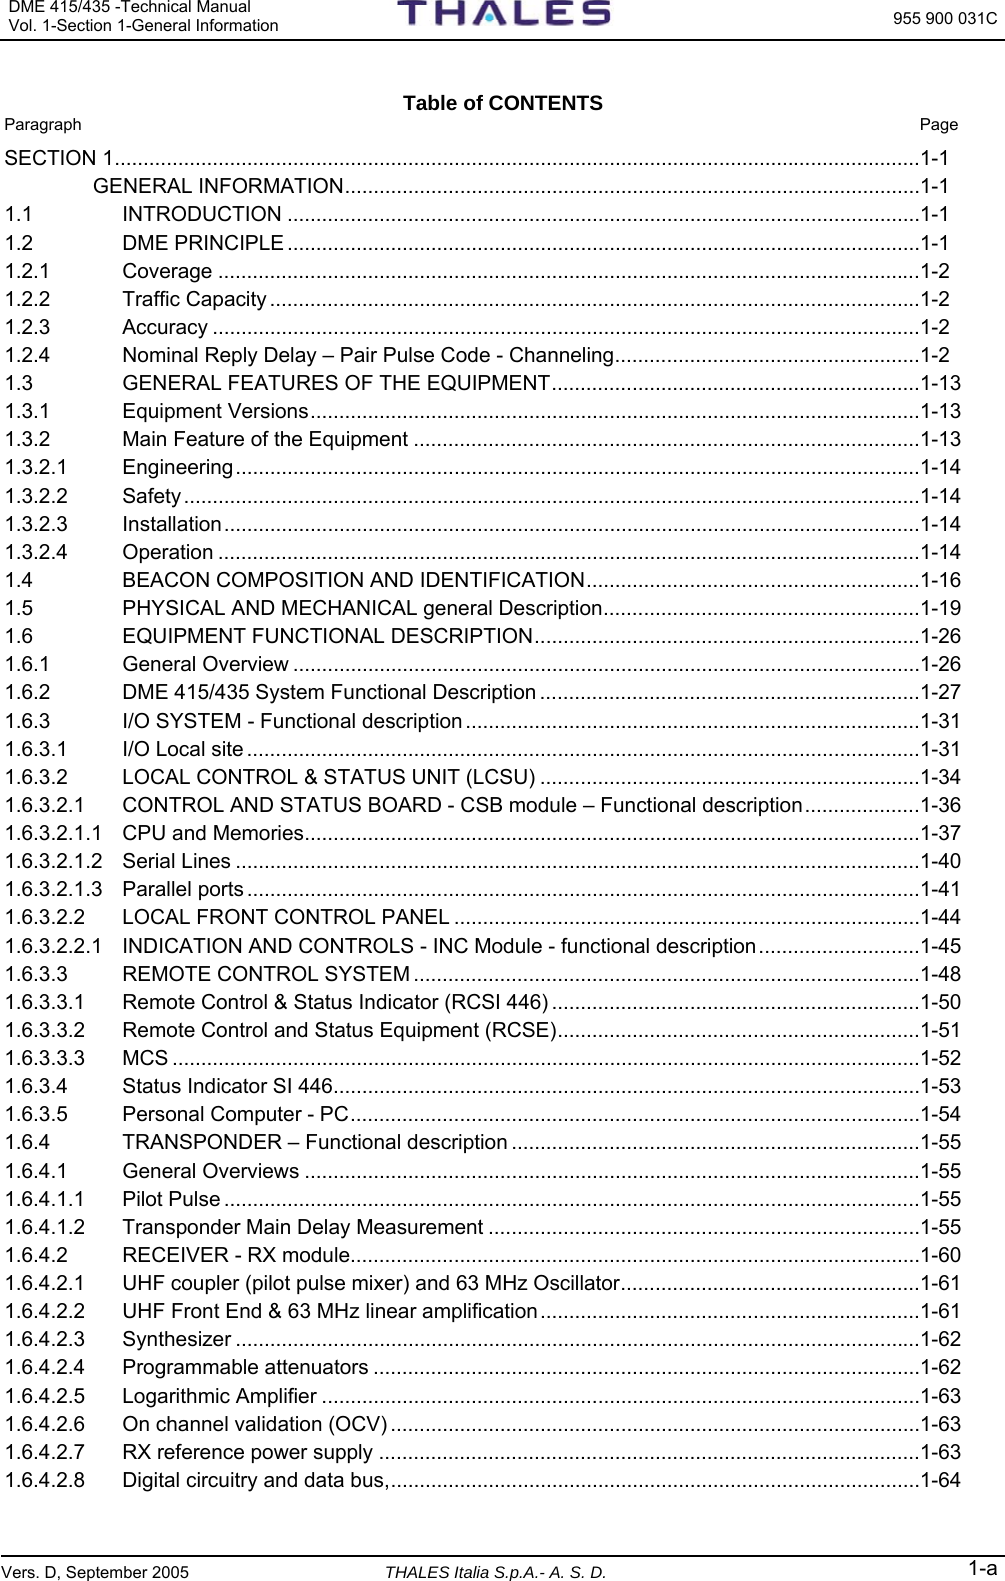 DME 415/435 -Technical Manual Vol. 1-Section 1-General Information  955 900 031C Vers. D, September 2005 THALES Italia S.p.A.- A. S. D. 1-a  Table of CONTENTS  Paragraph  Page SECTION 1............................................................................................................................................1-1  GENERAL INFORMATION....................................................................................................1-1 1.1 INTRODUCTION ..............................................................................................................1-1 1.2 DME PRINCIPLE ..............................................................................................................1-1 1.2.1 Coverage ..........................................................................................................................1-2 1.2.2 Traffic Capacity .................................................................................................................1-2 1.2.3 Accuracy ...........................................................................................................................1-2 1.2.4 Nominal Reply Delay – Pair Pulse Code - Channeling.....................................................1-2 1.3 GENERAL FEATURES OF THE EQUIPMENT................................................................1-13 1.3.1 Equipment Versions..........................................................................................................1-13 1.3.2 Main Feature of the Equipment ........................................................................................1-13 1.3.2.1 Engineering.......................................................................................................................1-14 1.3.2.2 Safety................................................................................................................................1-14 1.3.2.3 Installation.........................................................................................................................1-14 1.3.2.4 Operation ..........................................................................................................................1-14 1.4 BEACON COMPOSITION AND IDENTIFICATION..........................................................1-16 1.5 PHYSICAL AND MECHANICAL general Description.......................................................1-19 1.6 EQUIPMENT FUNCTIONAL DESCRIPTION...................................................................1-26 1.6.1 General Overview .............................................................................................................1-26 1.6.2 DME 415/435 System Functional Description ..................................................................1-27 1.6.3 I/O SYSTEM - Functional description ...............................................................................1-31 1.6.3.1 I/O Local site .....................................................................................................................1-31 1.6.3.2 LOCAL CONTROL &amp; STATUS UNIT (LCSU) ..................................................................1-34 1.6.3.2.1 CONTROL AND STATUS BOARD - CSB module – Functional description....................1-36 1.6.3.2.1.1 CPU and Memories...........................................................................................................1-37 1.6.3.2.1.2 Serial Lines .......................................................................................................................1-40 1.6.3.2.1.3 Parallel ports .....................................................................................................................1-41 1.6.3.2.2 LOCAL FRONT CONTROL PANEL .................................................................................1-44 1.6.3.2.2.1 INDICATION AND CONTROLS - INC Module - functional description............................1-45 1.6.3.3 REMOTE CONTROL SYSTEM ........................................................................................1-48 1.6.3.3.1 Remote Control &amp; Status Indicator (RCSI 446) ................................................................1-50 1.6.3.3.2 Remote Control and Status Equipment (RCSE)...............................................................1-51 1.6.3.3.3 MCS ..................................................................................................................................1-52 1.6.3.4 Status Indicator SI 446......................................................................................................1-53 1.6.3.5 Personal Computer - PC...................................................................................................1-54 1.6.4 TRANSPONDER – Functional description .......................................................................1-55 1.6.4.1 General Overviews ...........................................................................................................1-55 1.6.4.1.1 Pilot Pulse .........................................................................................................................1-55 1.6.4.1.2 Transponder Main Delay Measurement ...........................................................................1-55 1.6.4.2 RECEIVER - RX module...................................................................................................1-60 1.6.4.2.1 UHF coupler (pilot pulse mixer) and 63 MHz Oscillator....................................................1-61 1.6.4.2.2 UHF Front End &amp; 63 MHz linear amplification..................................................................1-61 1.6.4.2.3 Synthesizer .......................................................................................................................1-62 1.6.4.2.4 Programmable attenuators ...............................................................................................1-62 1.6.4.2.5 Logarithmic Amplifier ........................................................................................................1-63 1.6.4.2.6 On channel validation (OCV) ............................................................................................1-63 1.6.4.2.7 RX reference power supply ..............................................................................................1-63 1.6.4.2.8 Digital circuitry and data bus,............................................................................................1-64 